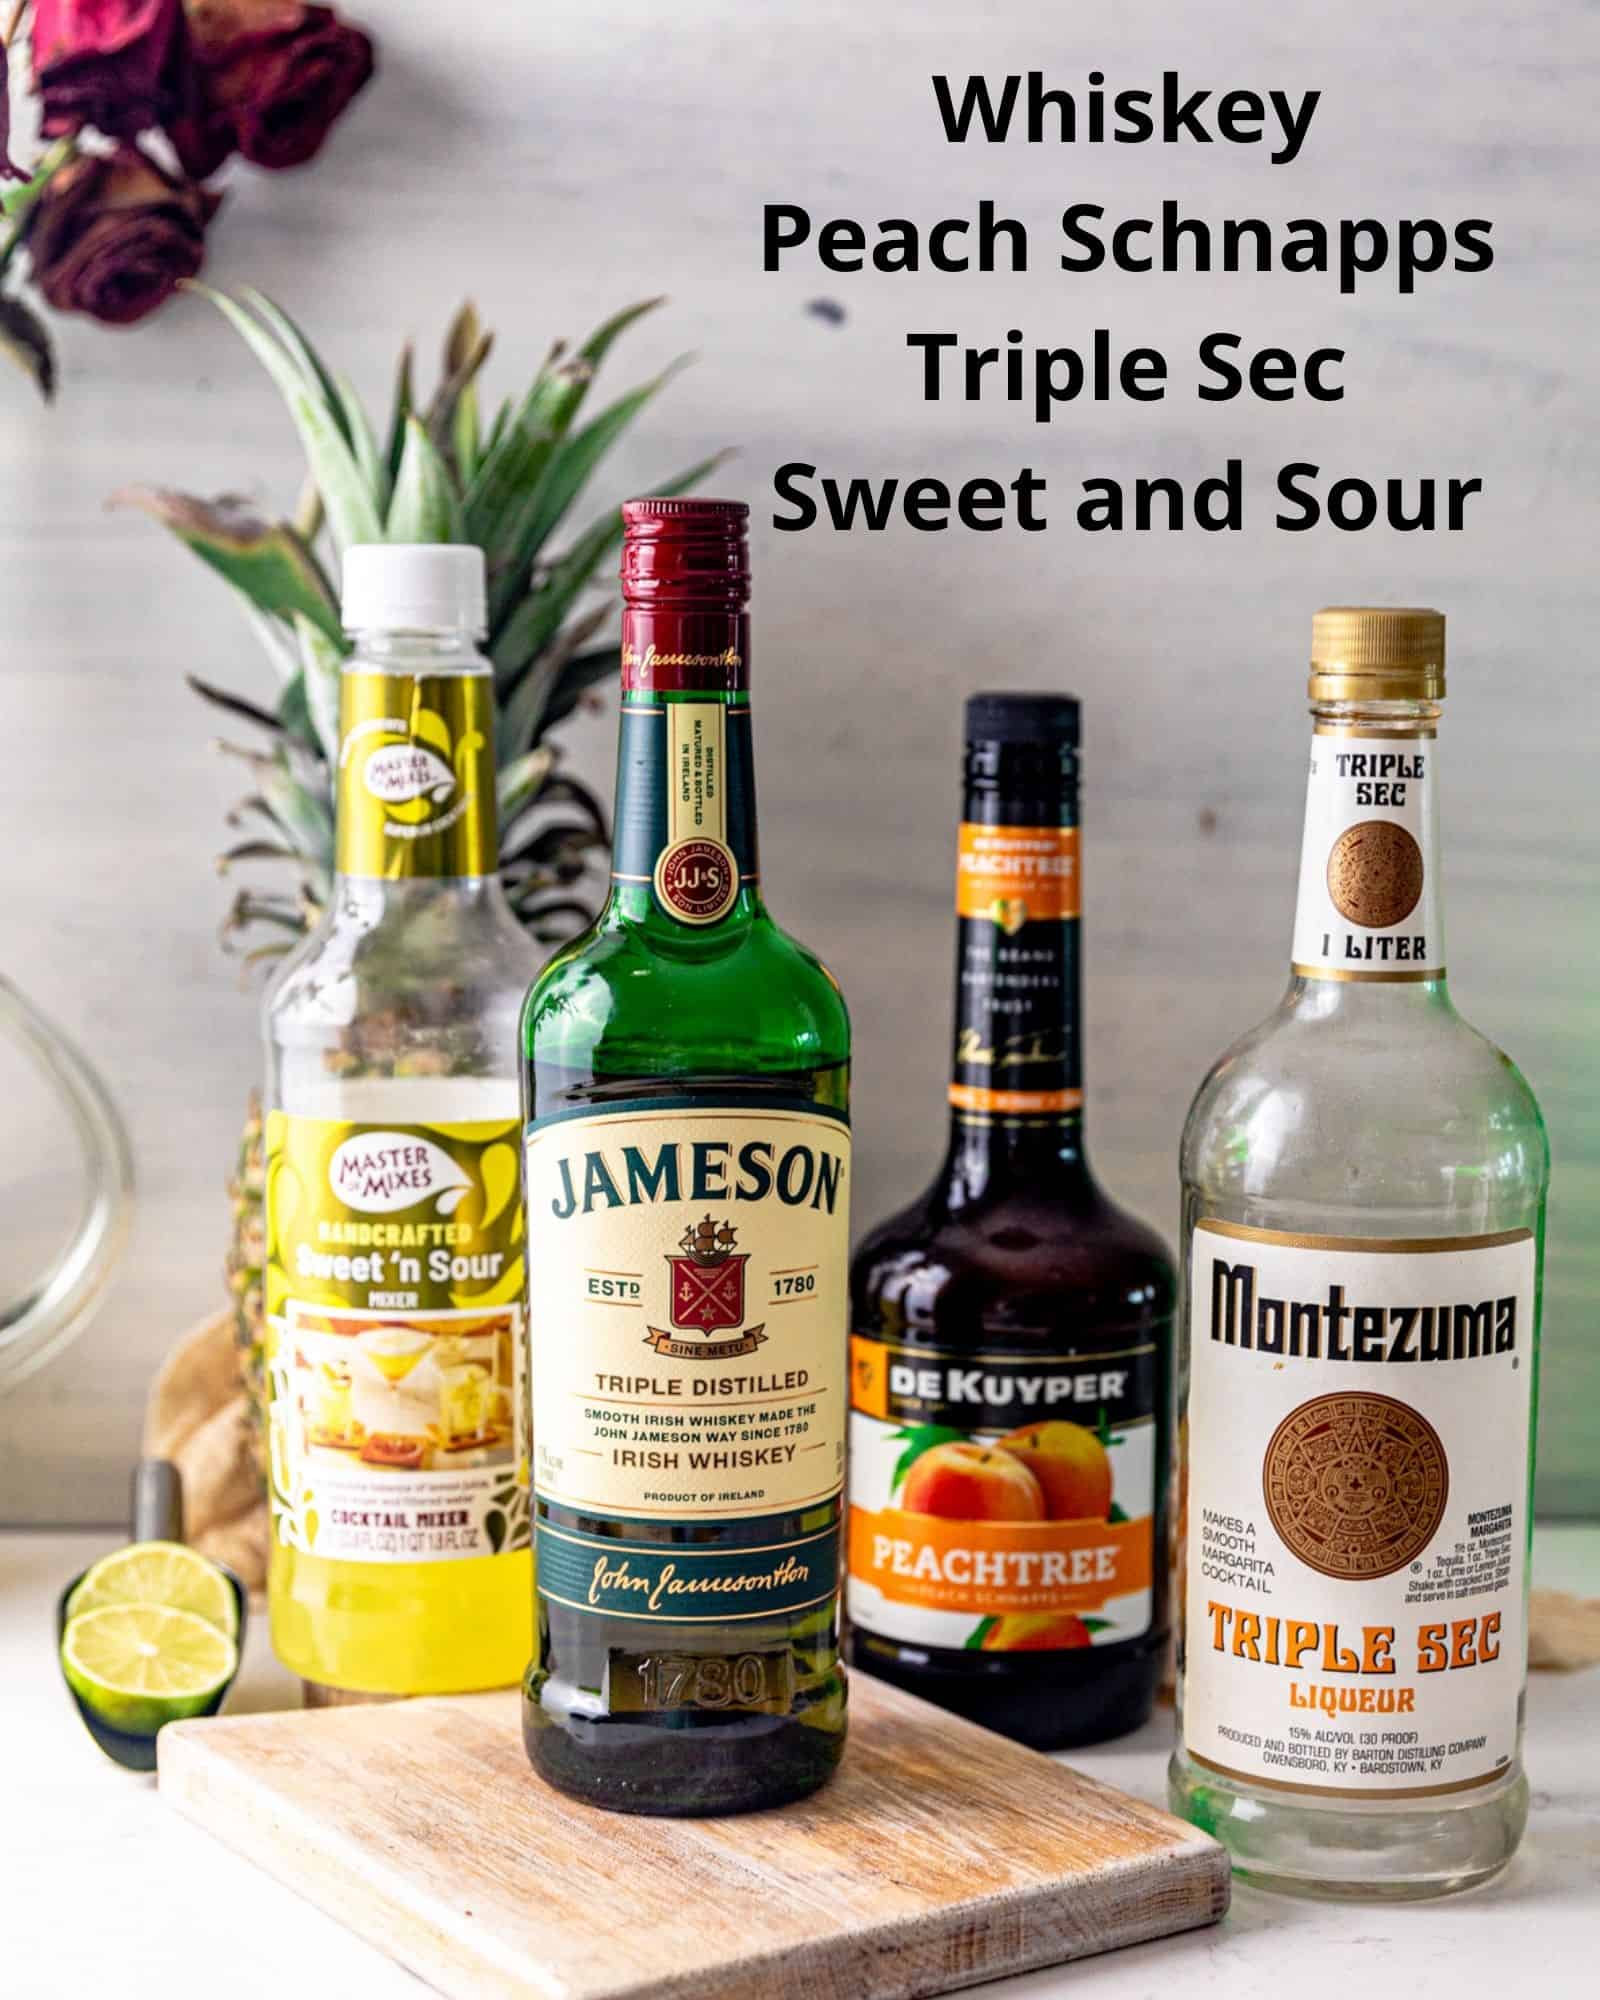 ingredients needed to make water moccasin shot - whiskey, peach schnapps, triple sec, and sweet and sour mix.